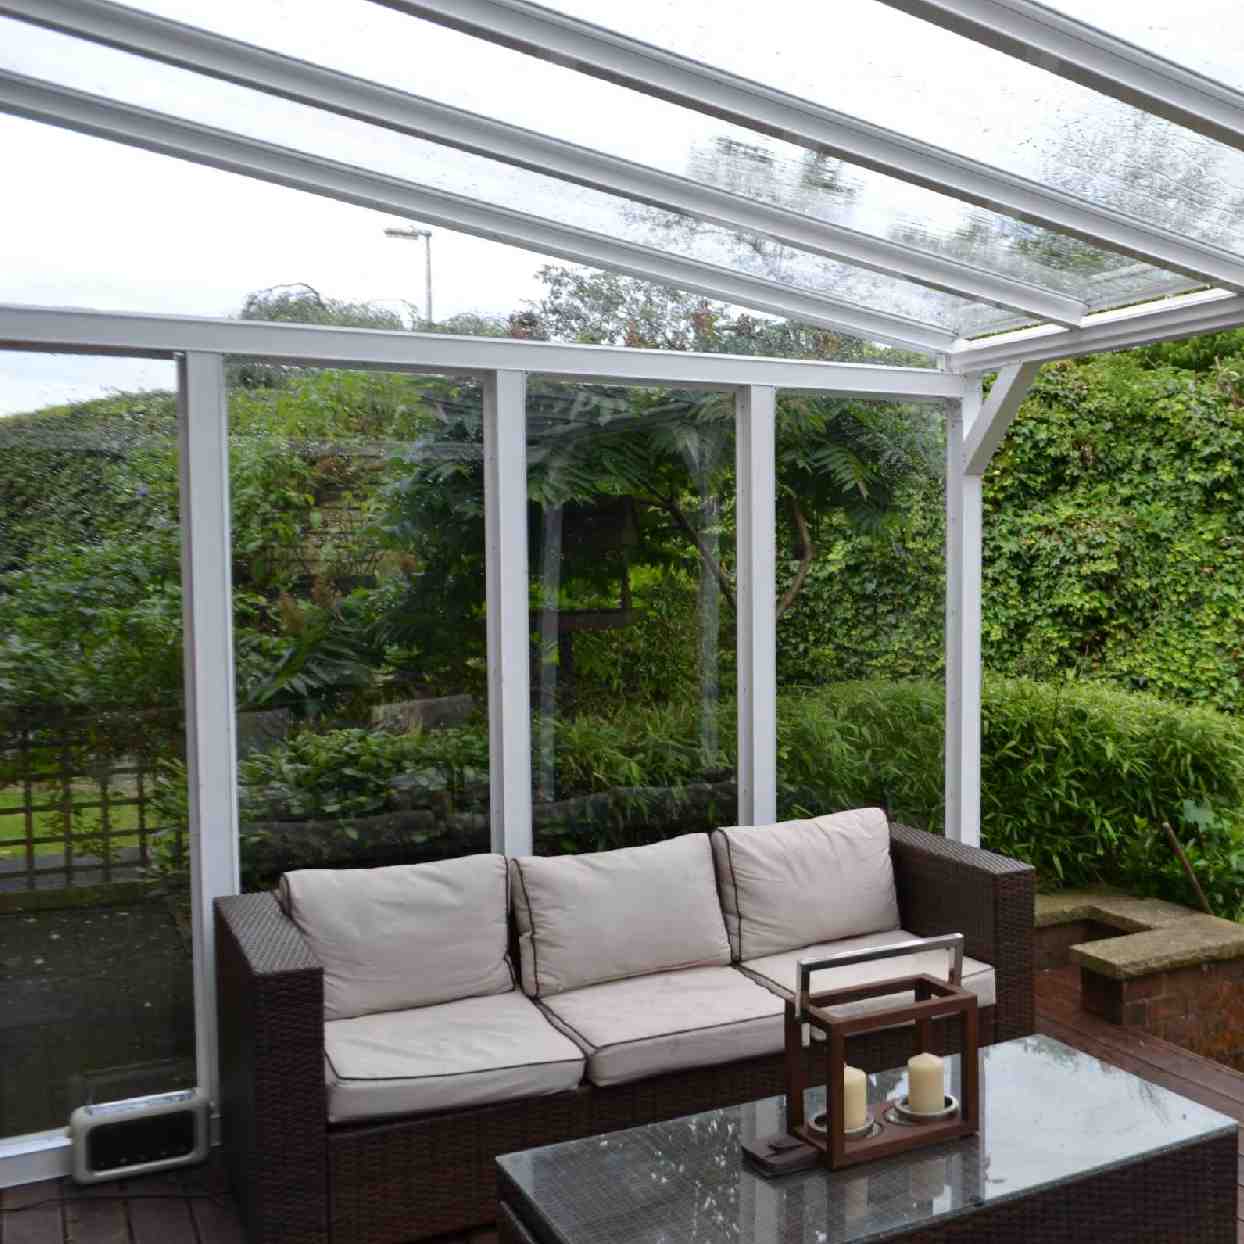 Buy Omega Verandah White with 6mm Glass Clear Plate Polycarbonate Glazing - 7.0m (W) x 3.5m (P), (4) Supporting Posts online today